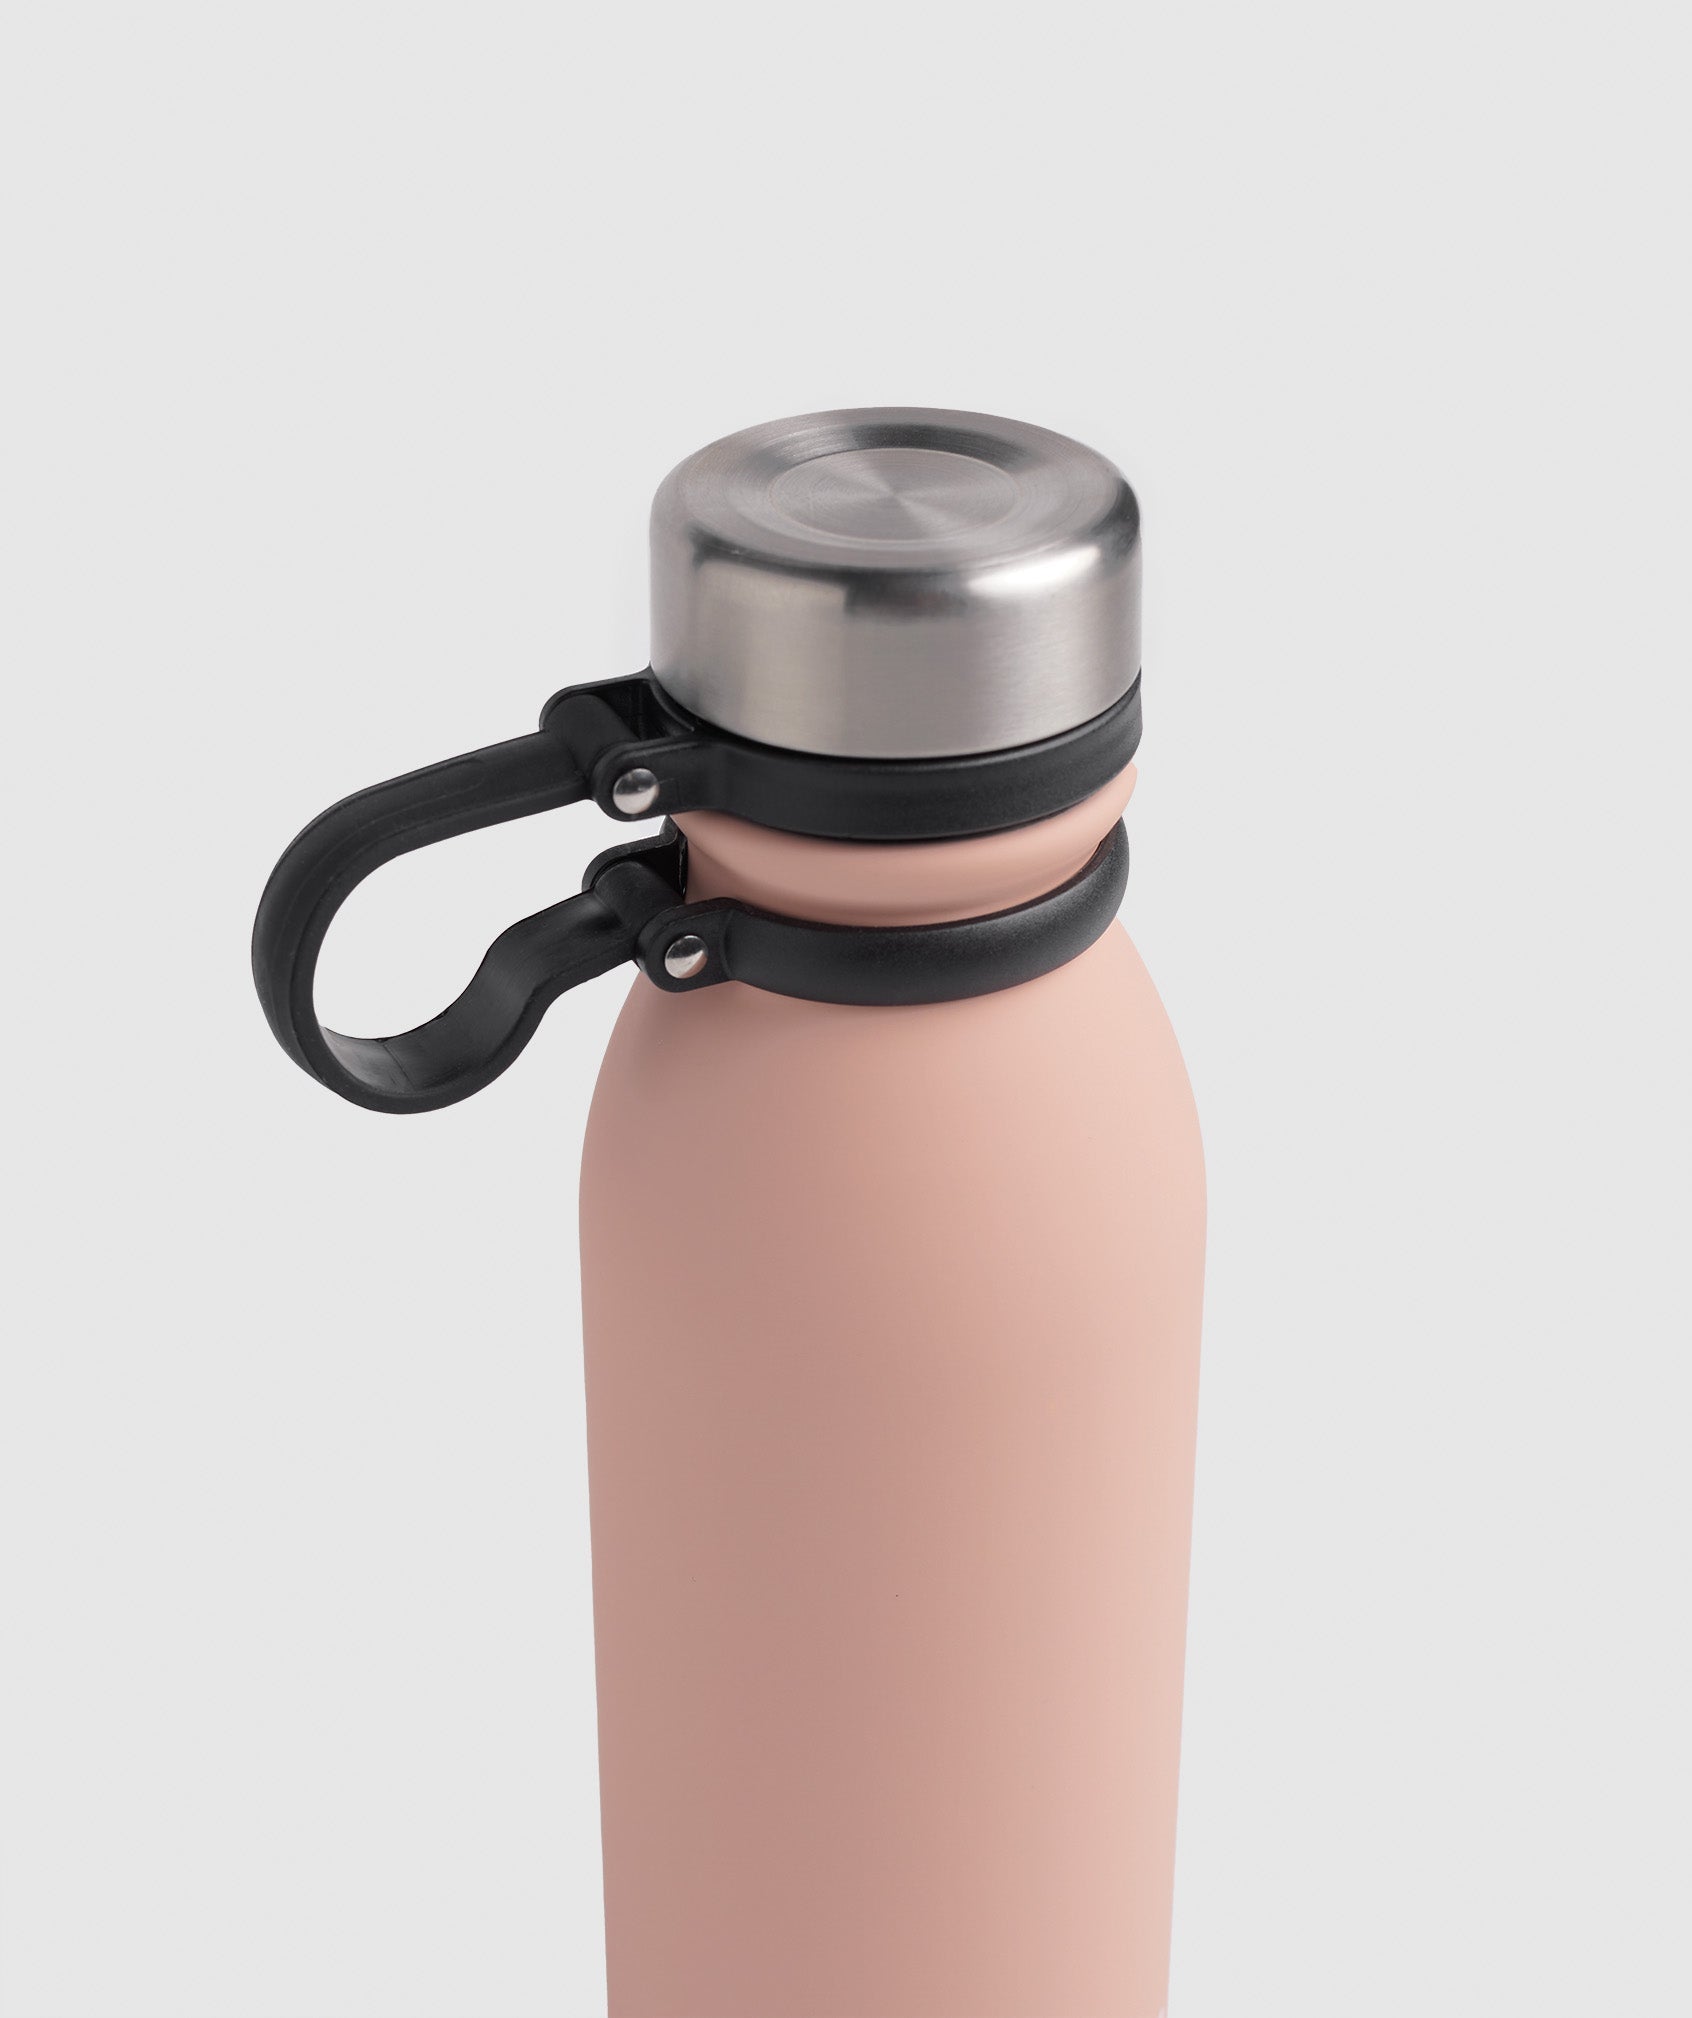 Hot/Cold Bottle in Hazy Pink - view 3